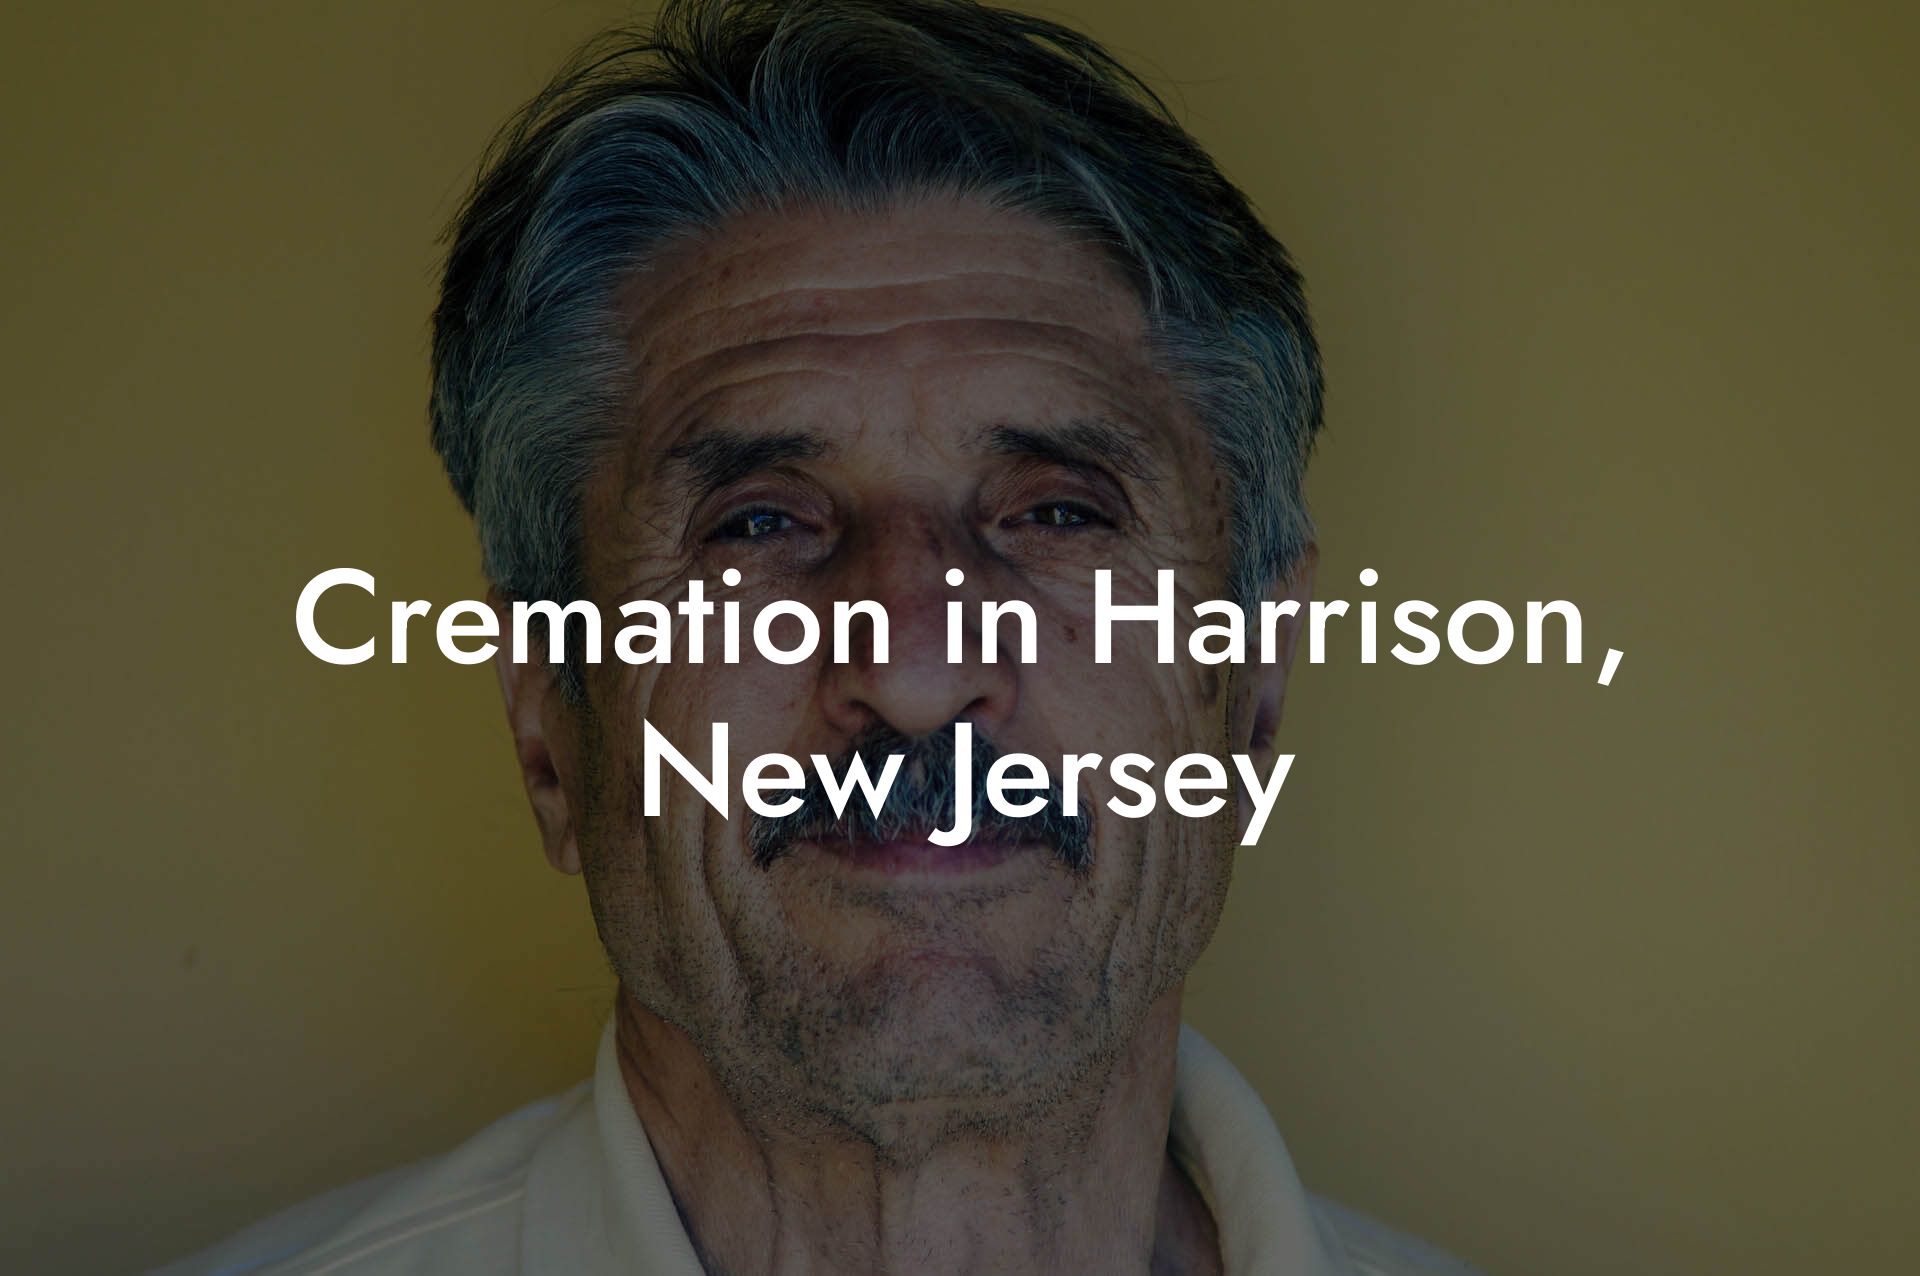 Cremation in Harrison, New Jersey